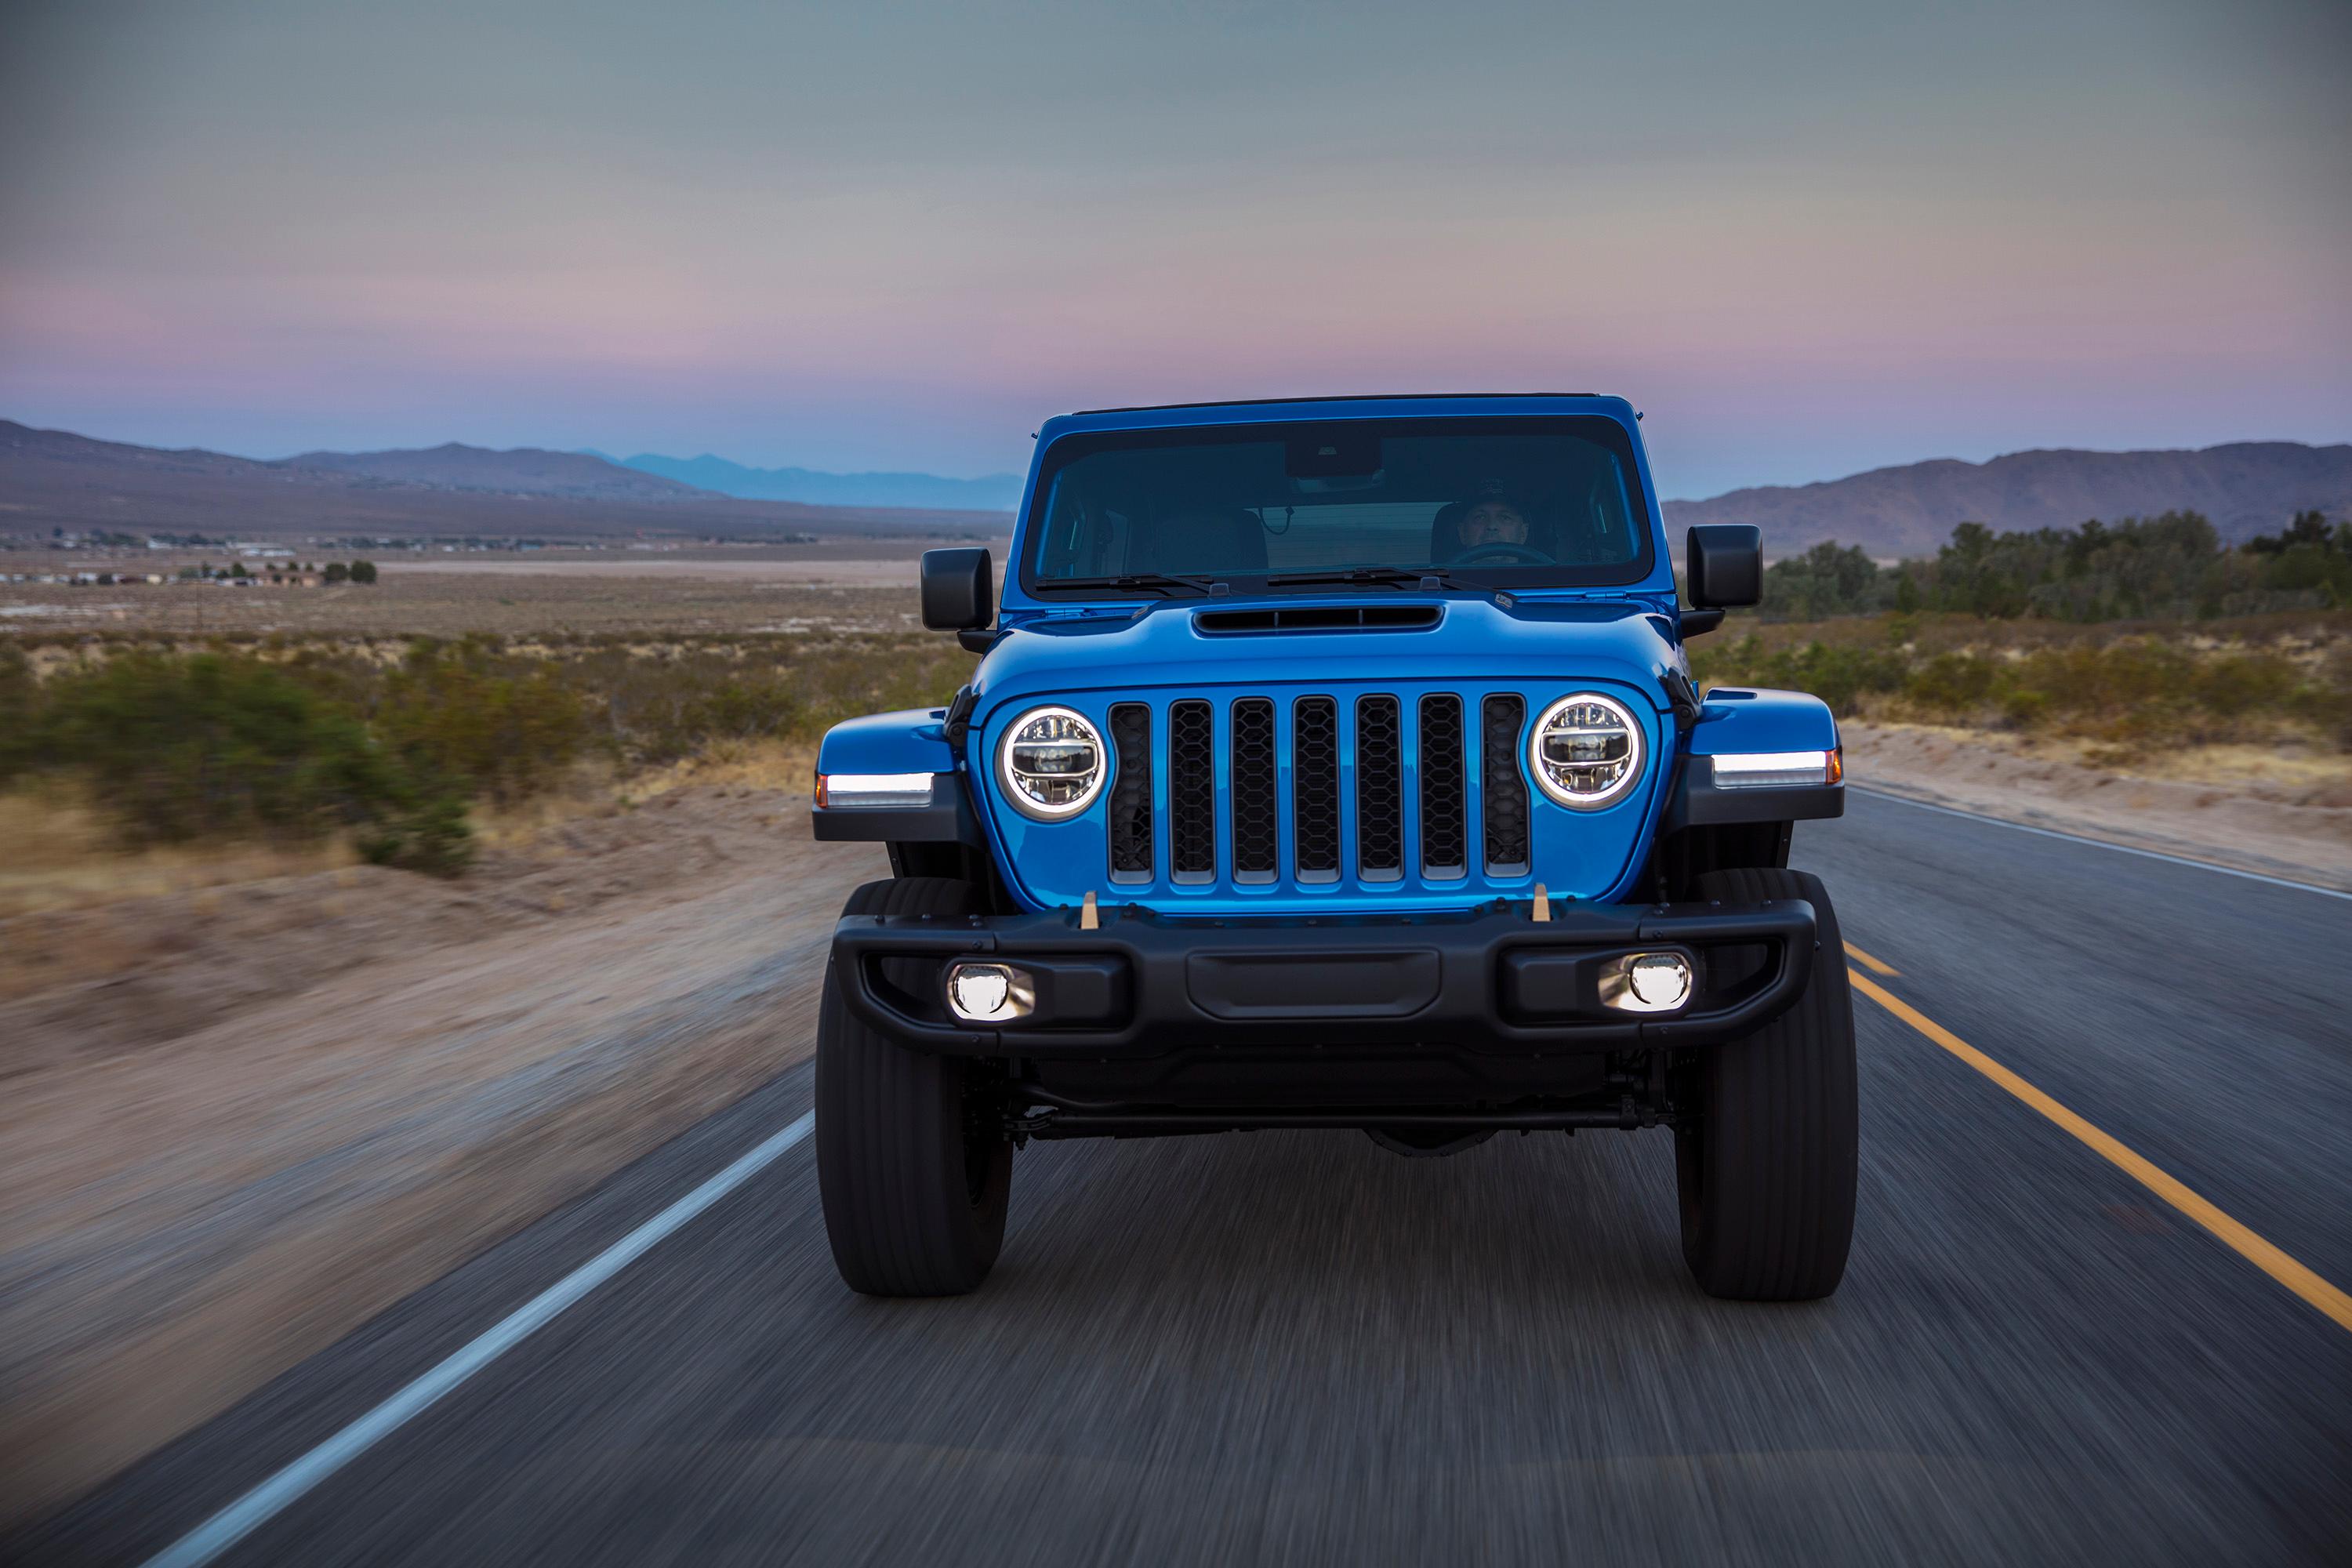 Jeep rarely makes big upgrades to the Wrangler, and the 2022 model is no exception.